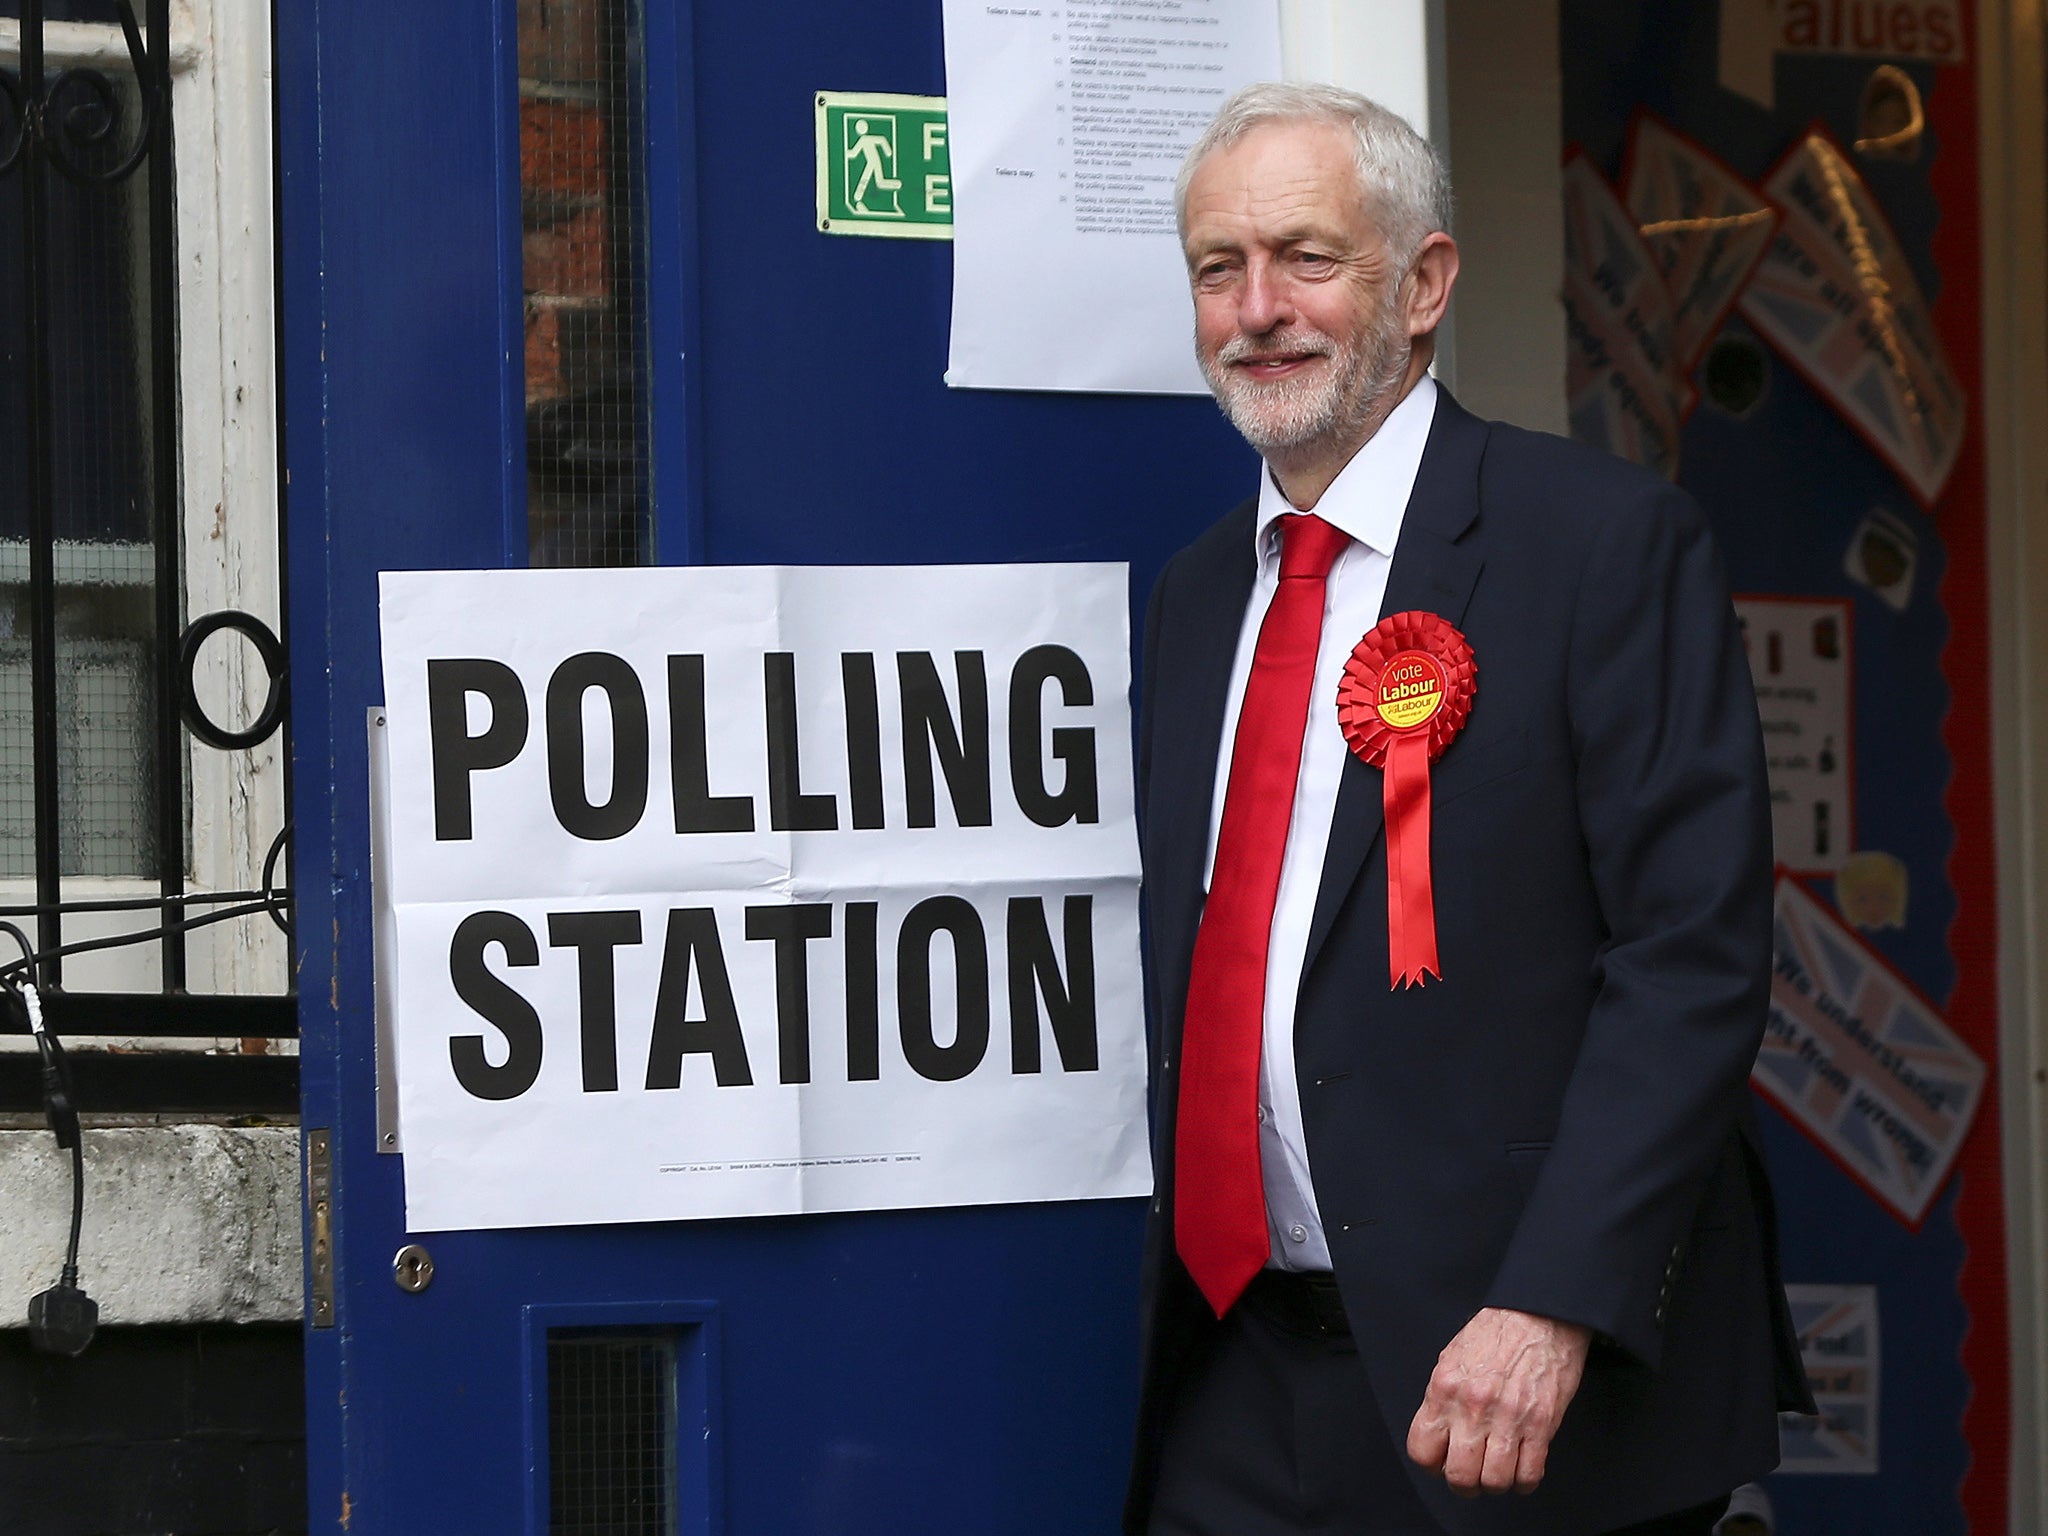 Jeremy Corbyn received colossal support from the youth during the general election